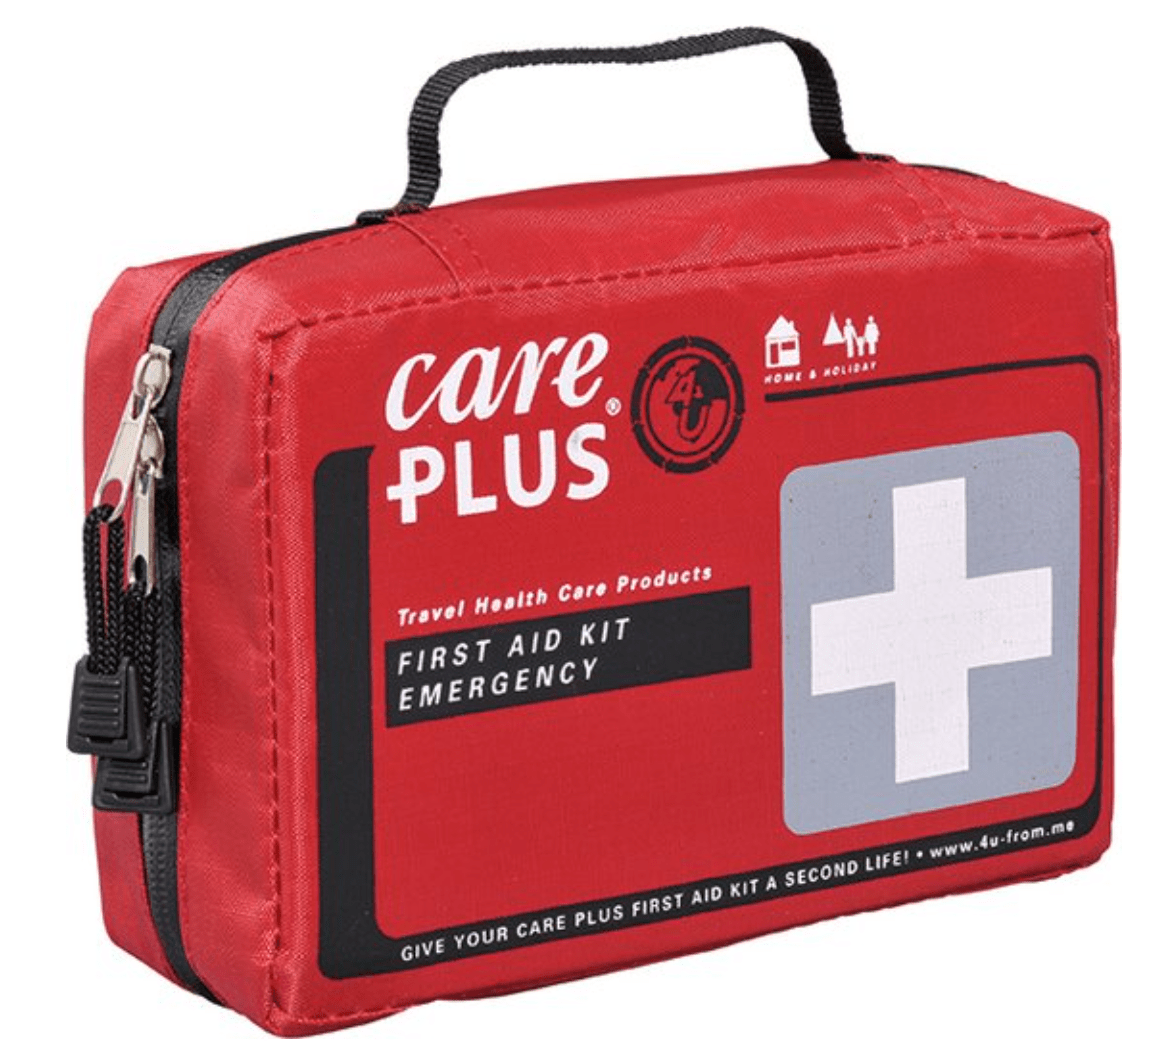 Care Plus First Aid Kit Care Plus Emergency First Aid Kit